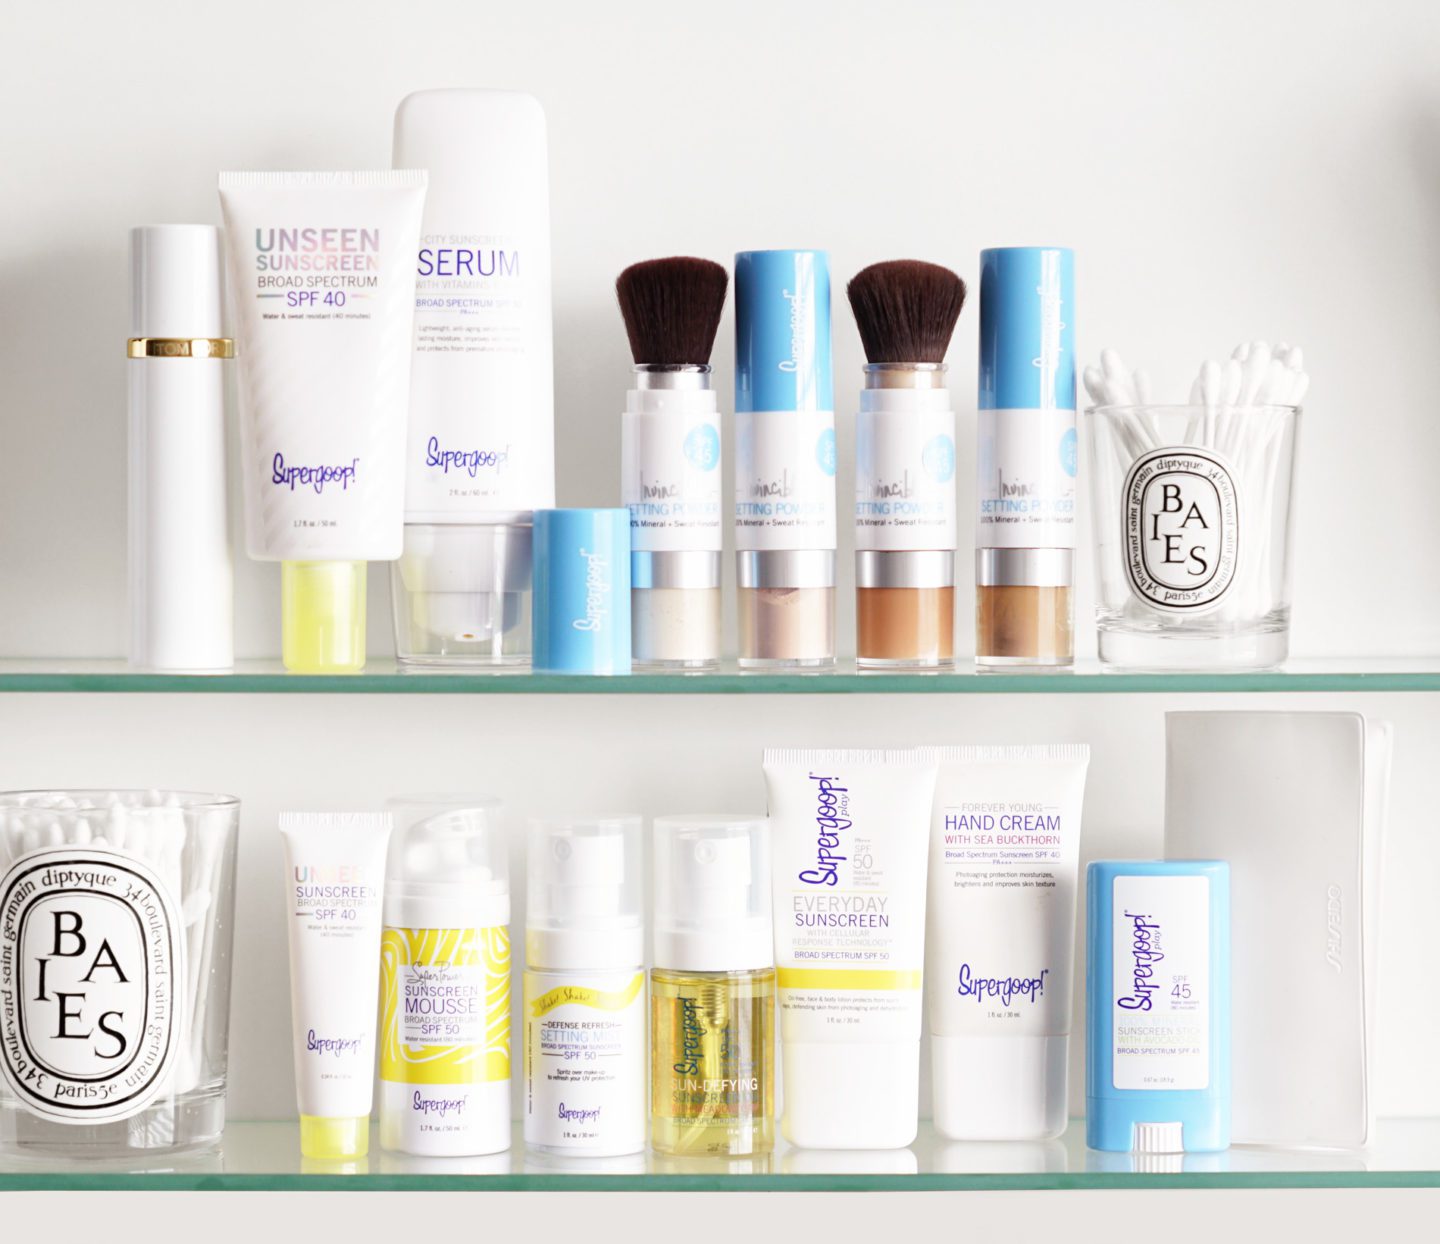 Supergoop! Favorites Minis Unseen Sunscreen, Mineral Powder, Everyday Sunscreen and Oil